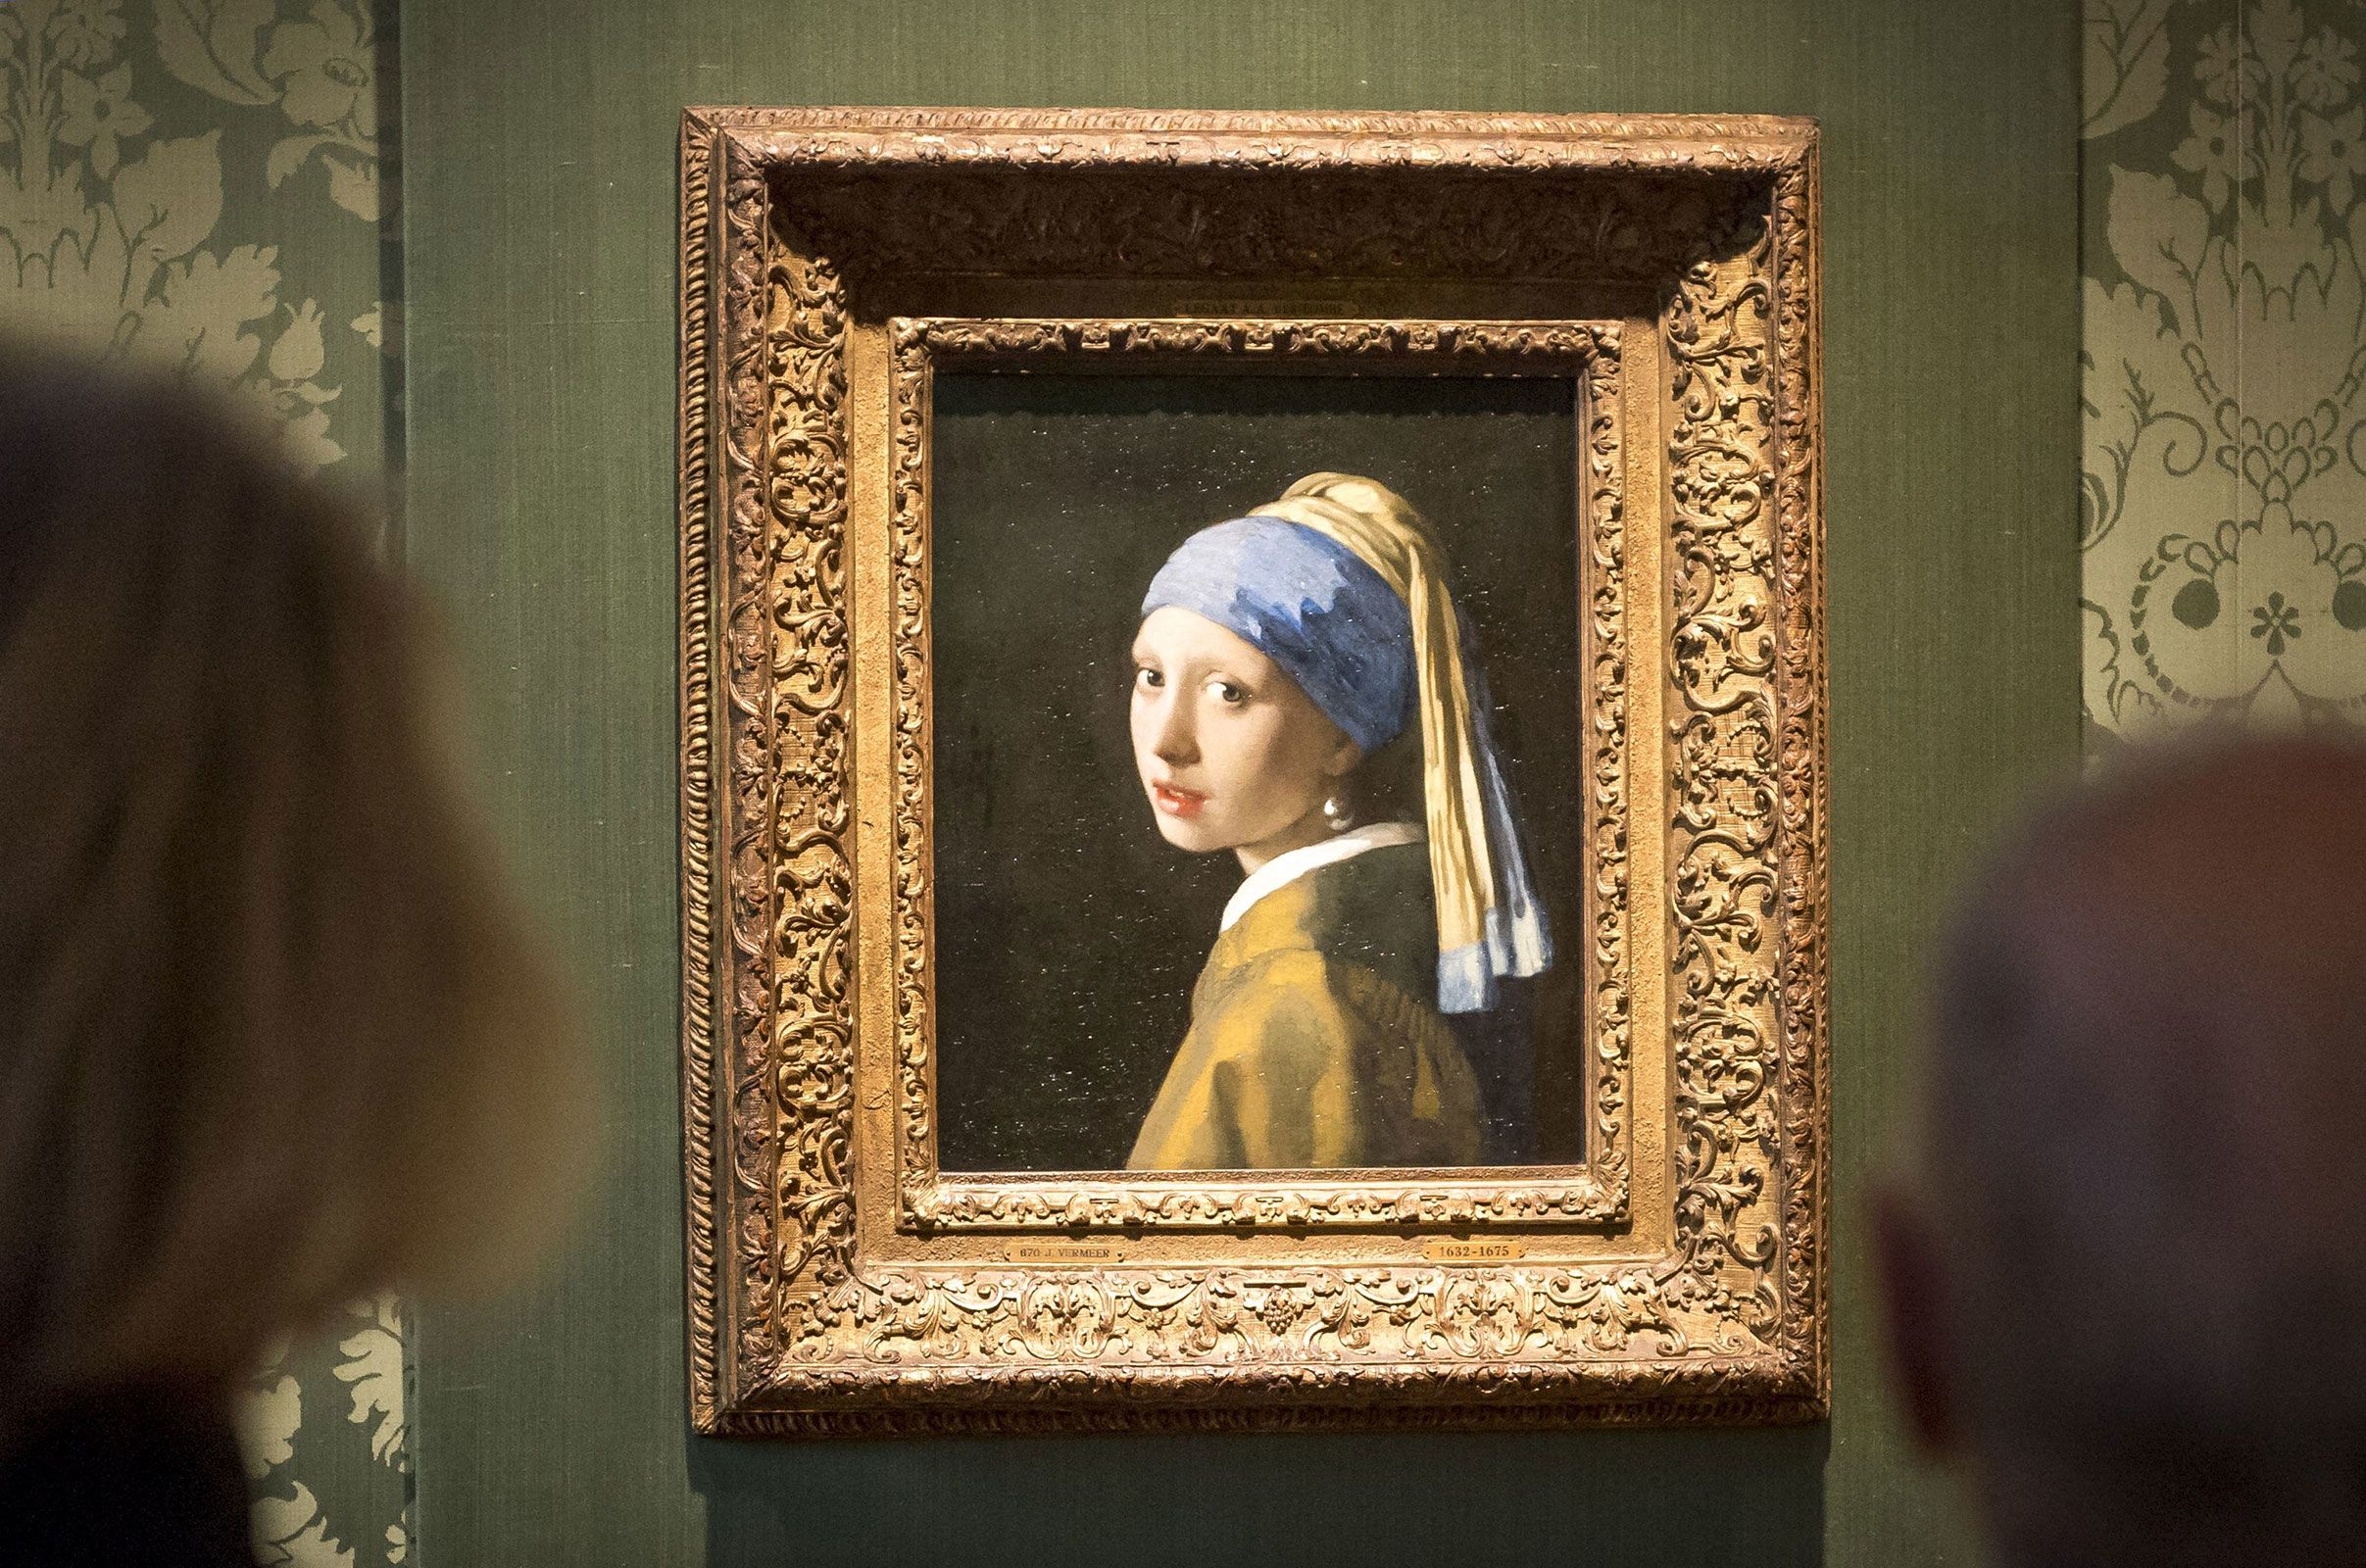 Johannes Vermeer's painting "Girl with a Pearl Earring" was targeted by climate activists in October 2022.